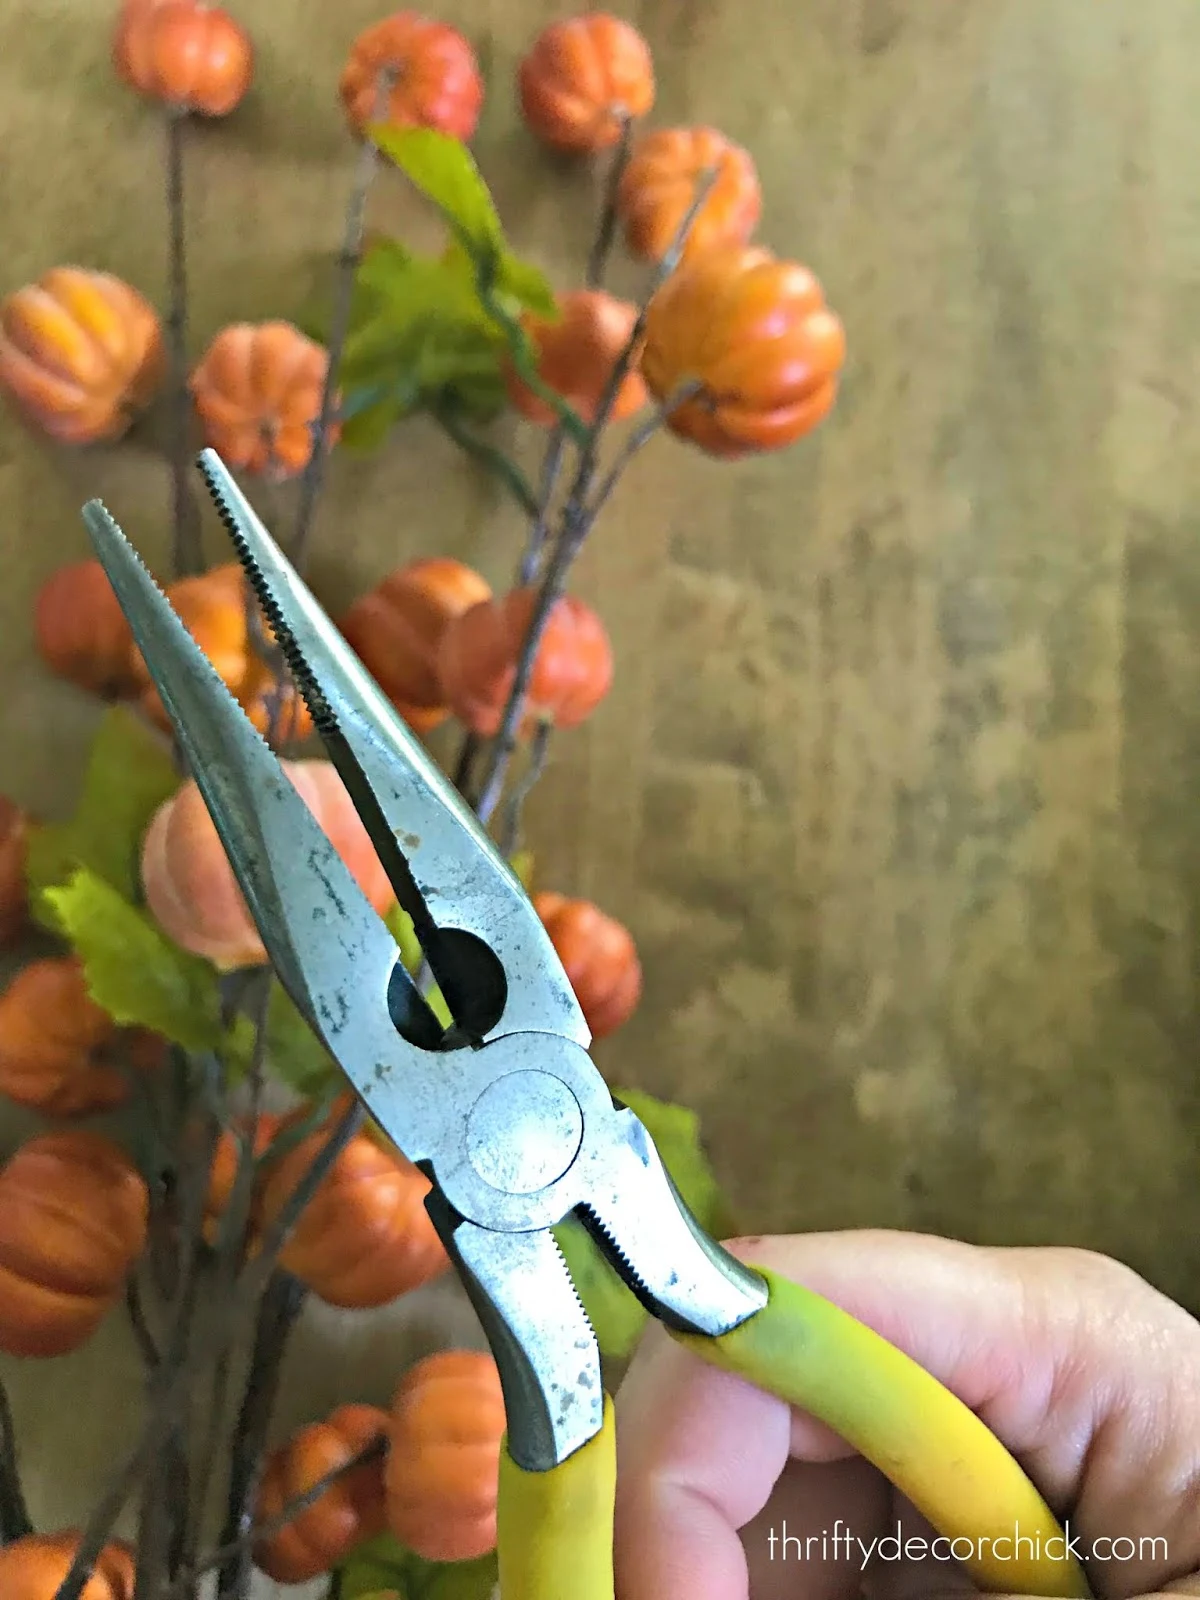 Pliers for cutting down fake flowers